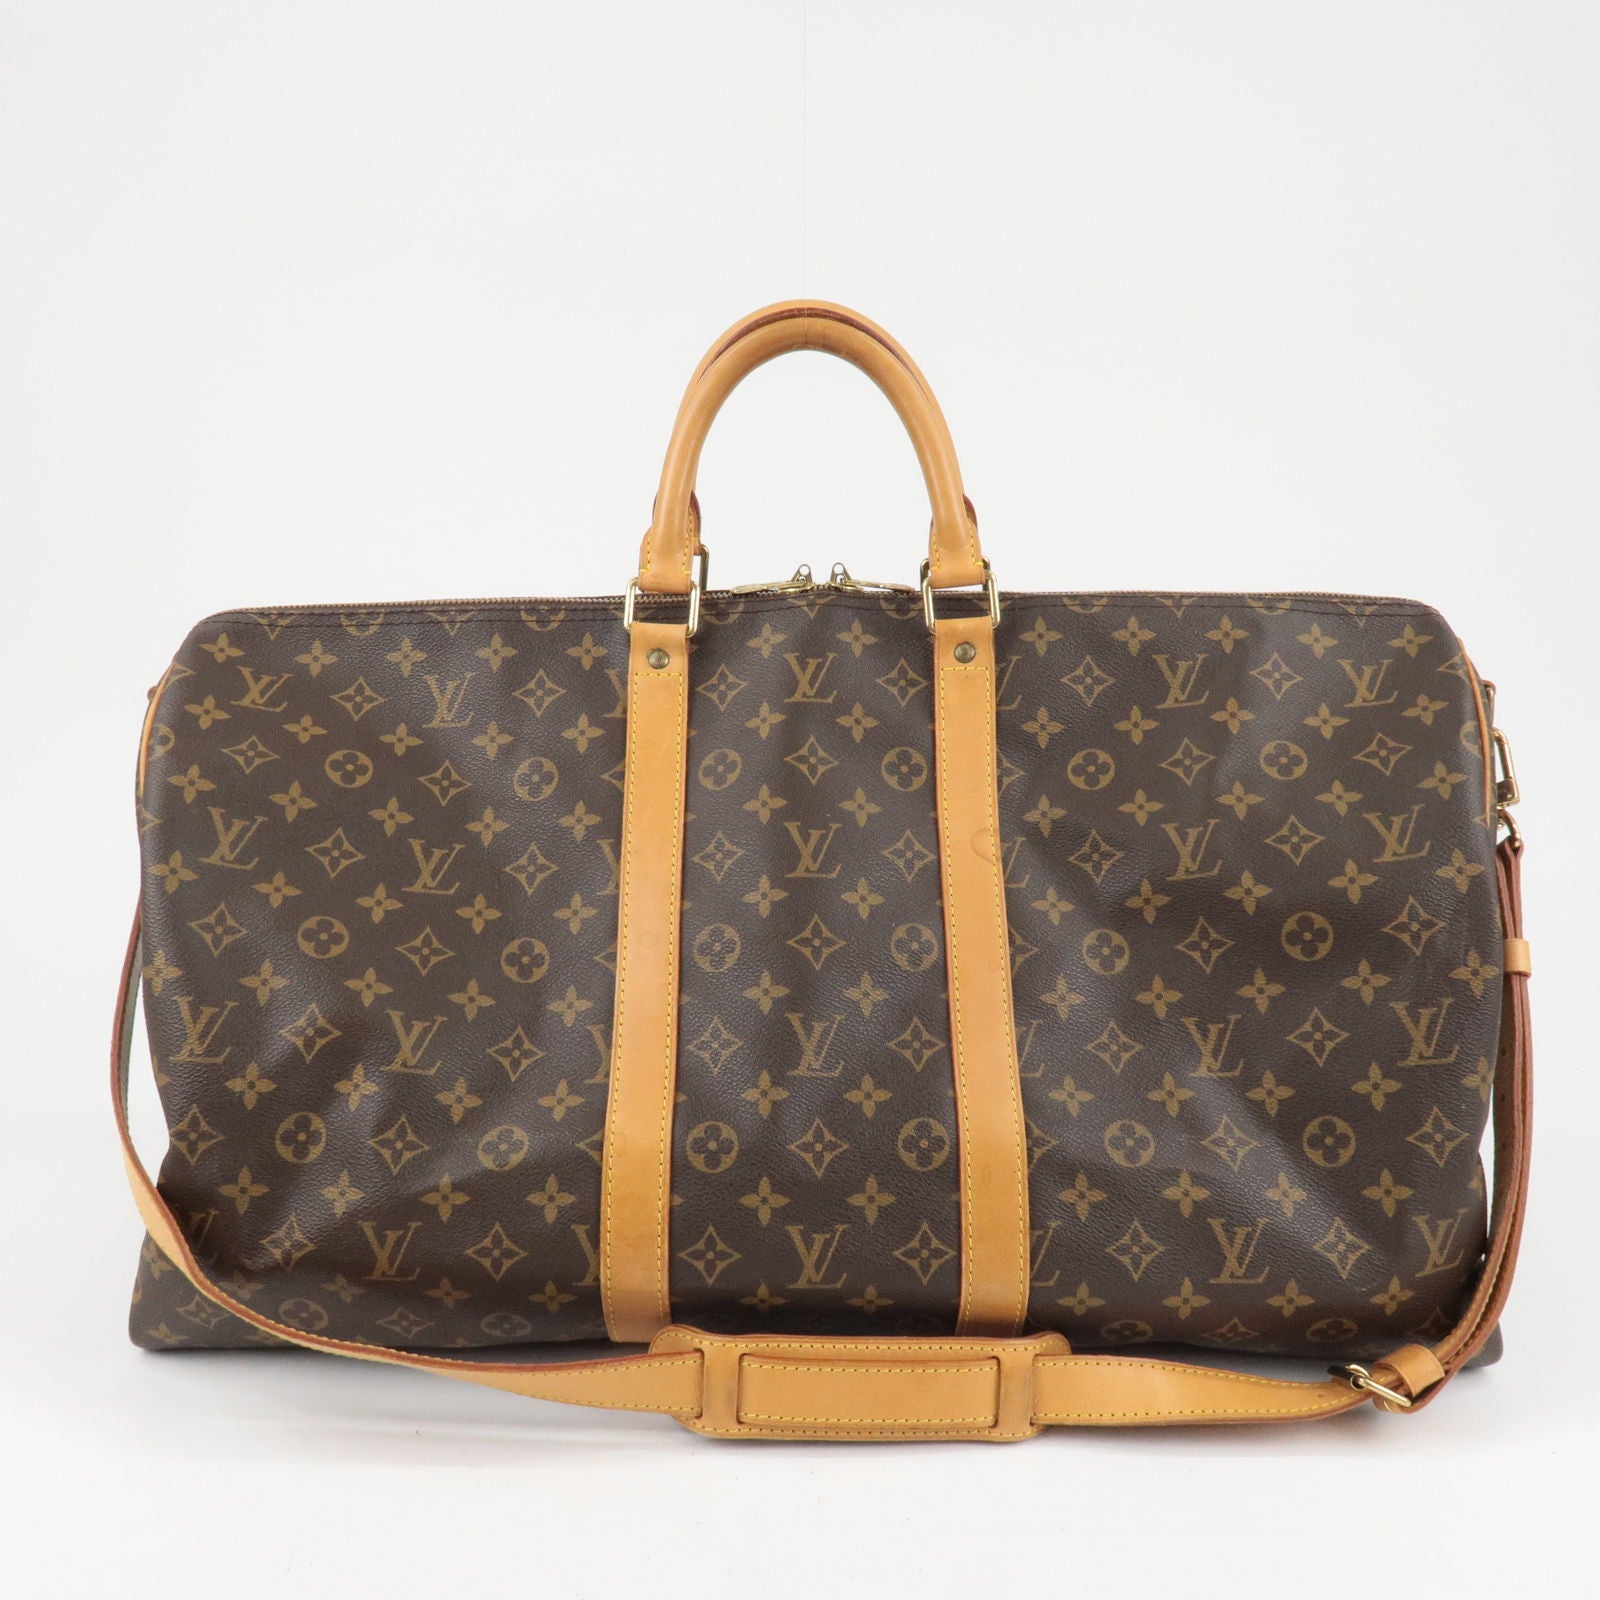 Products by Louis Vuitton: Keepall Bandoulière 55  Louis vuitton saco,  Louis vuitton keepall, Louis vuitton keepall 55